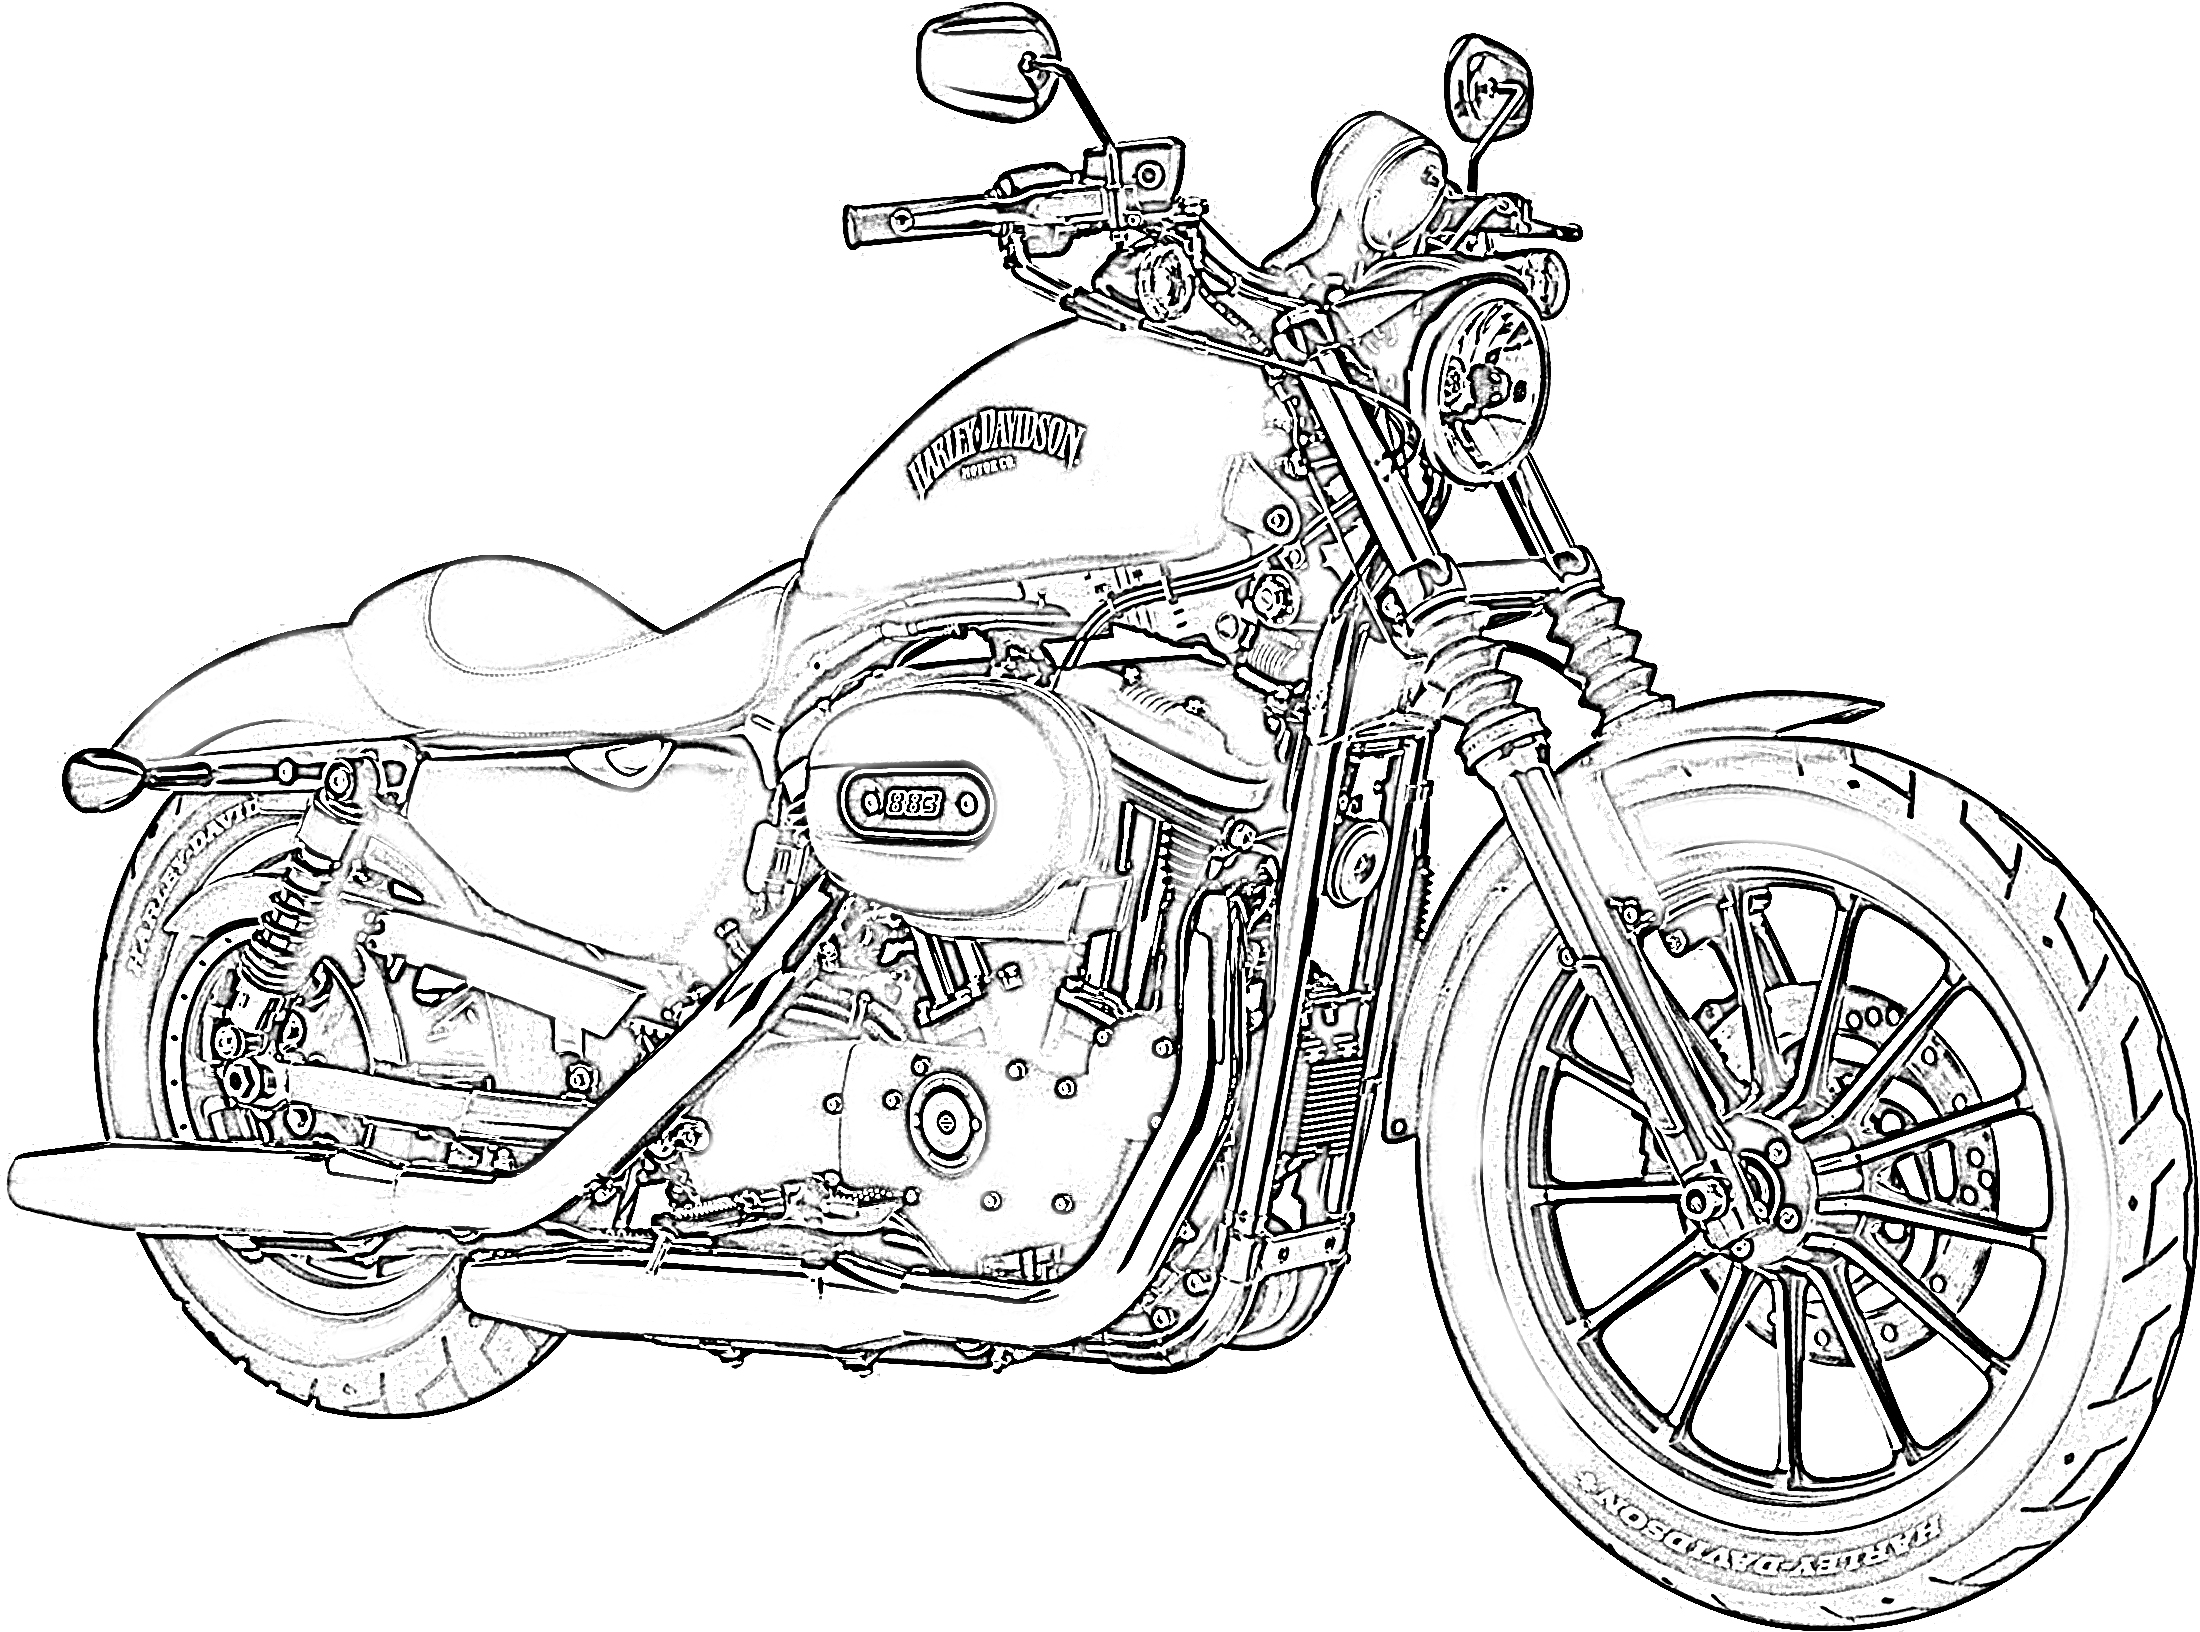 10 Free Harley Davidson Coloring Pages for Kids